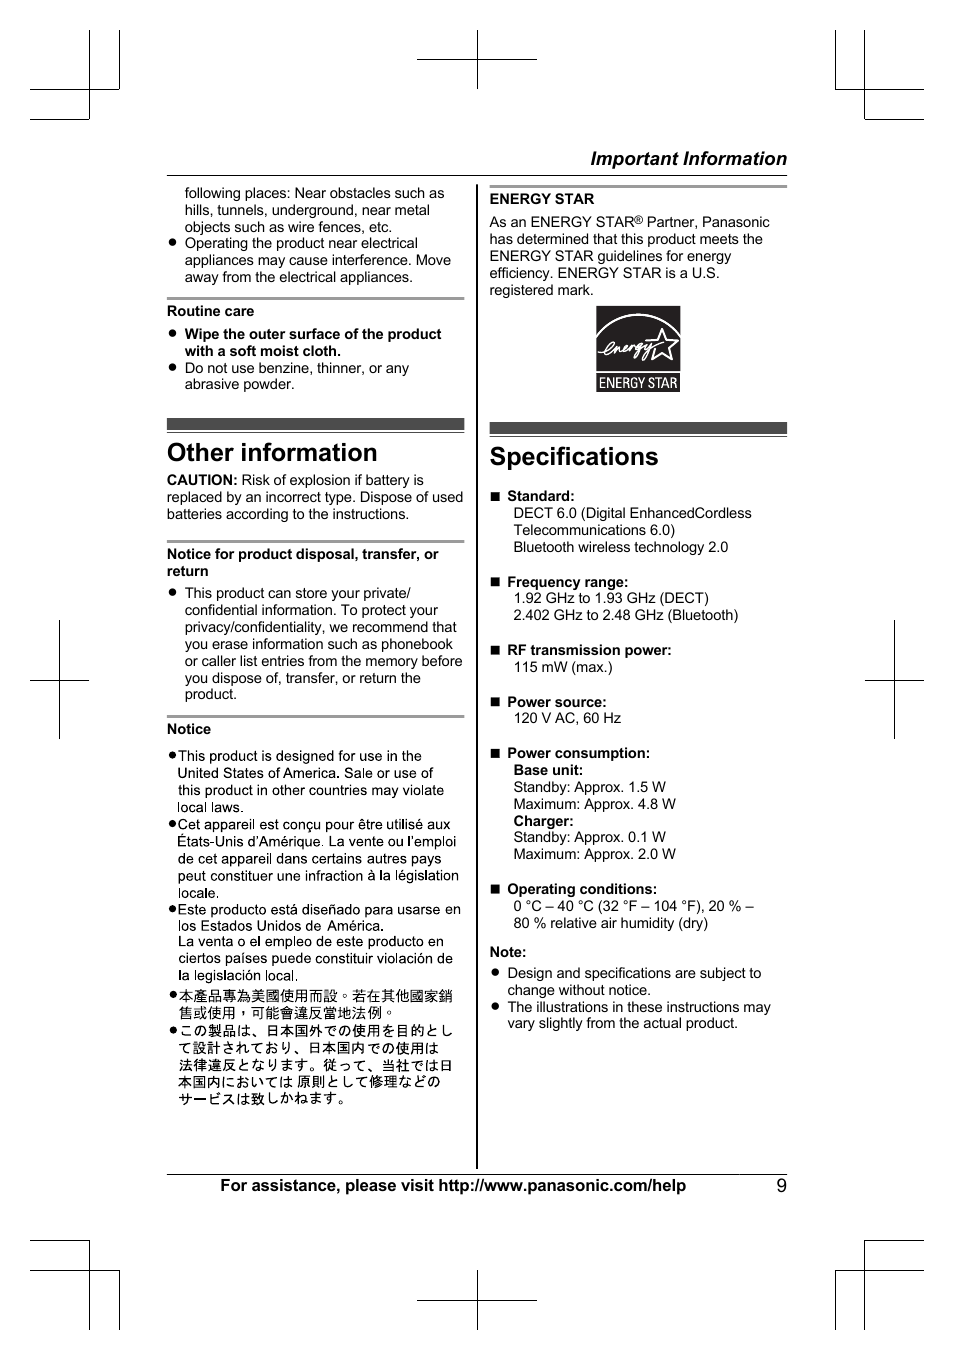 Other information, Specifications, Other information specifications | Panasonic KX-TG7644 User Manual | Page 9 / 100